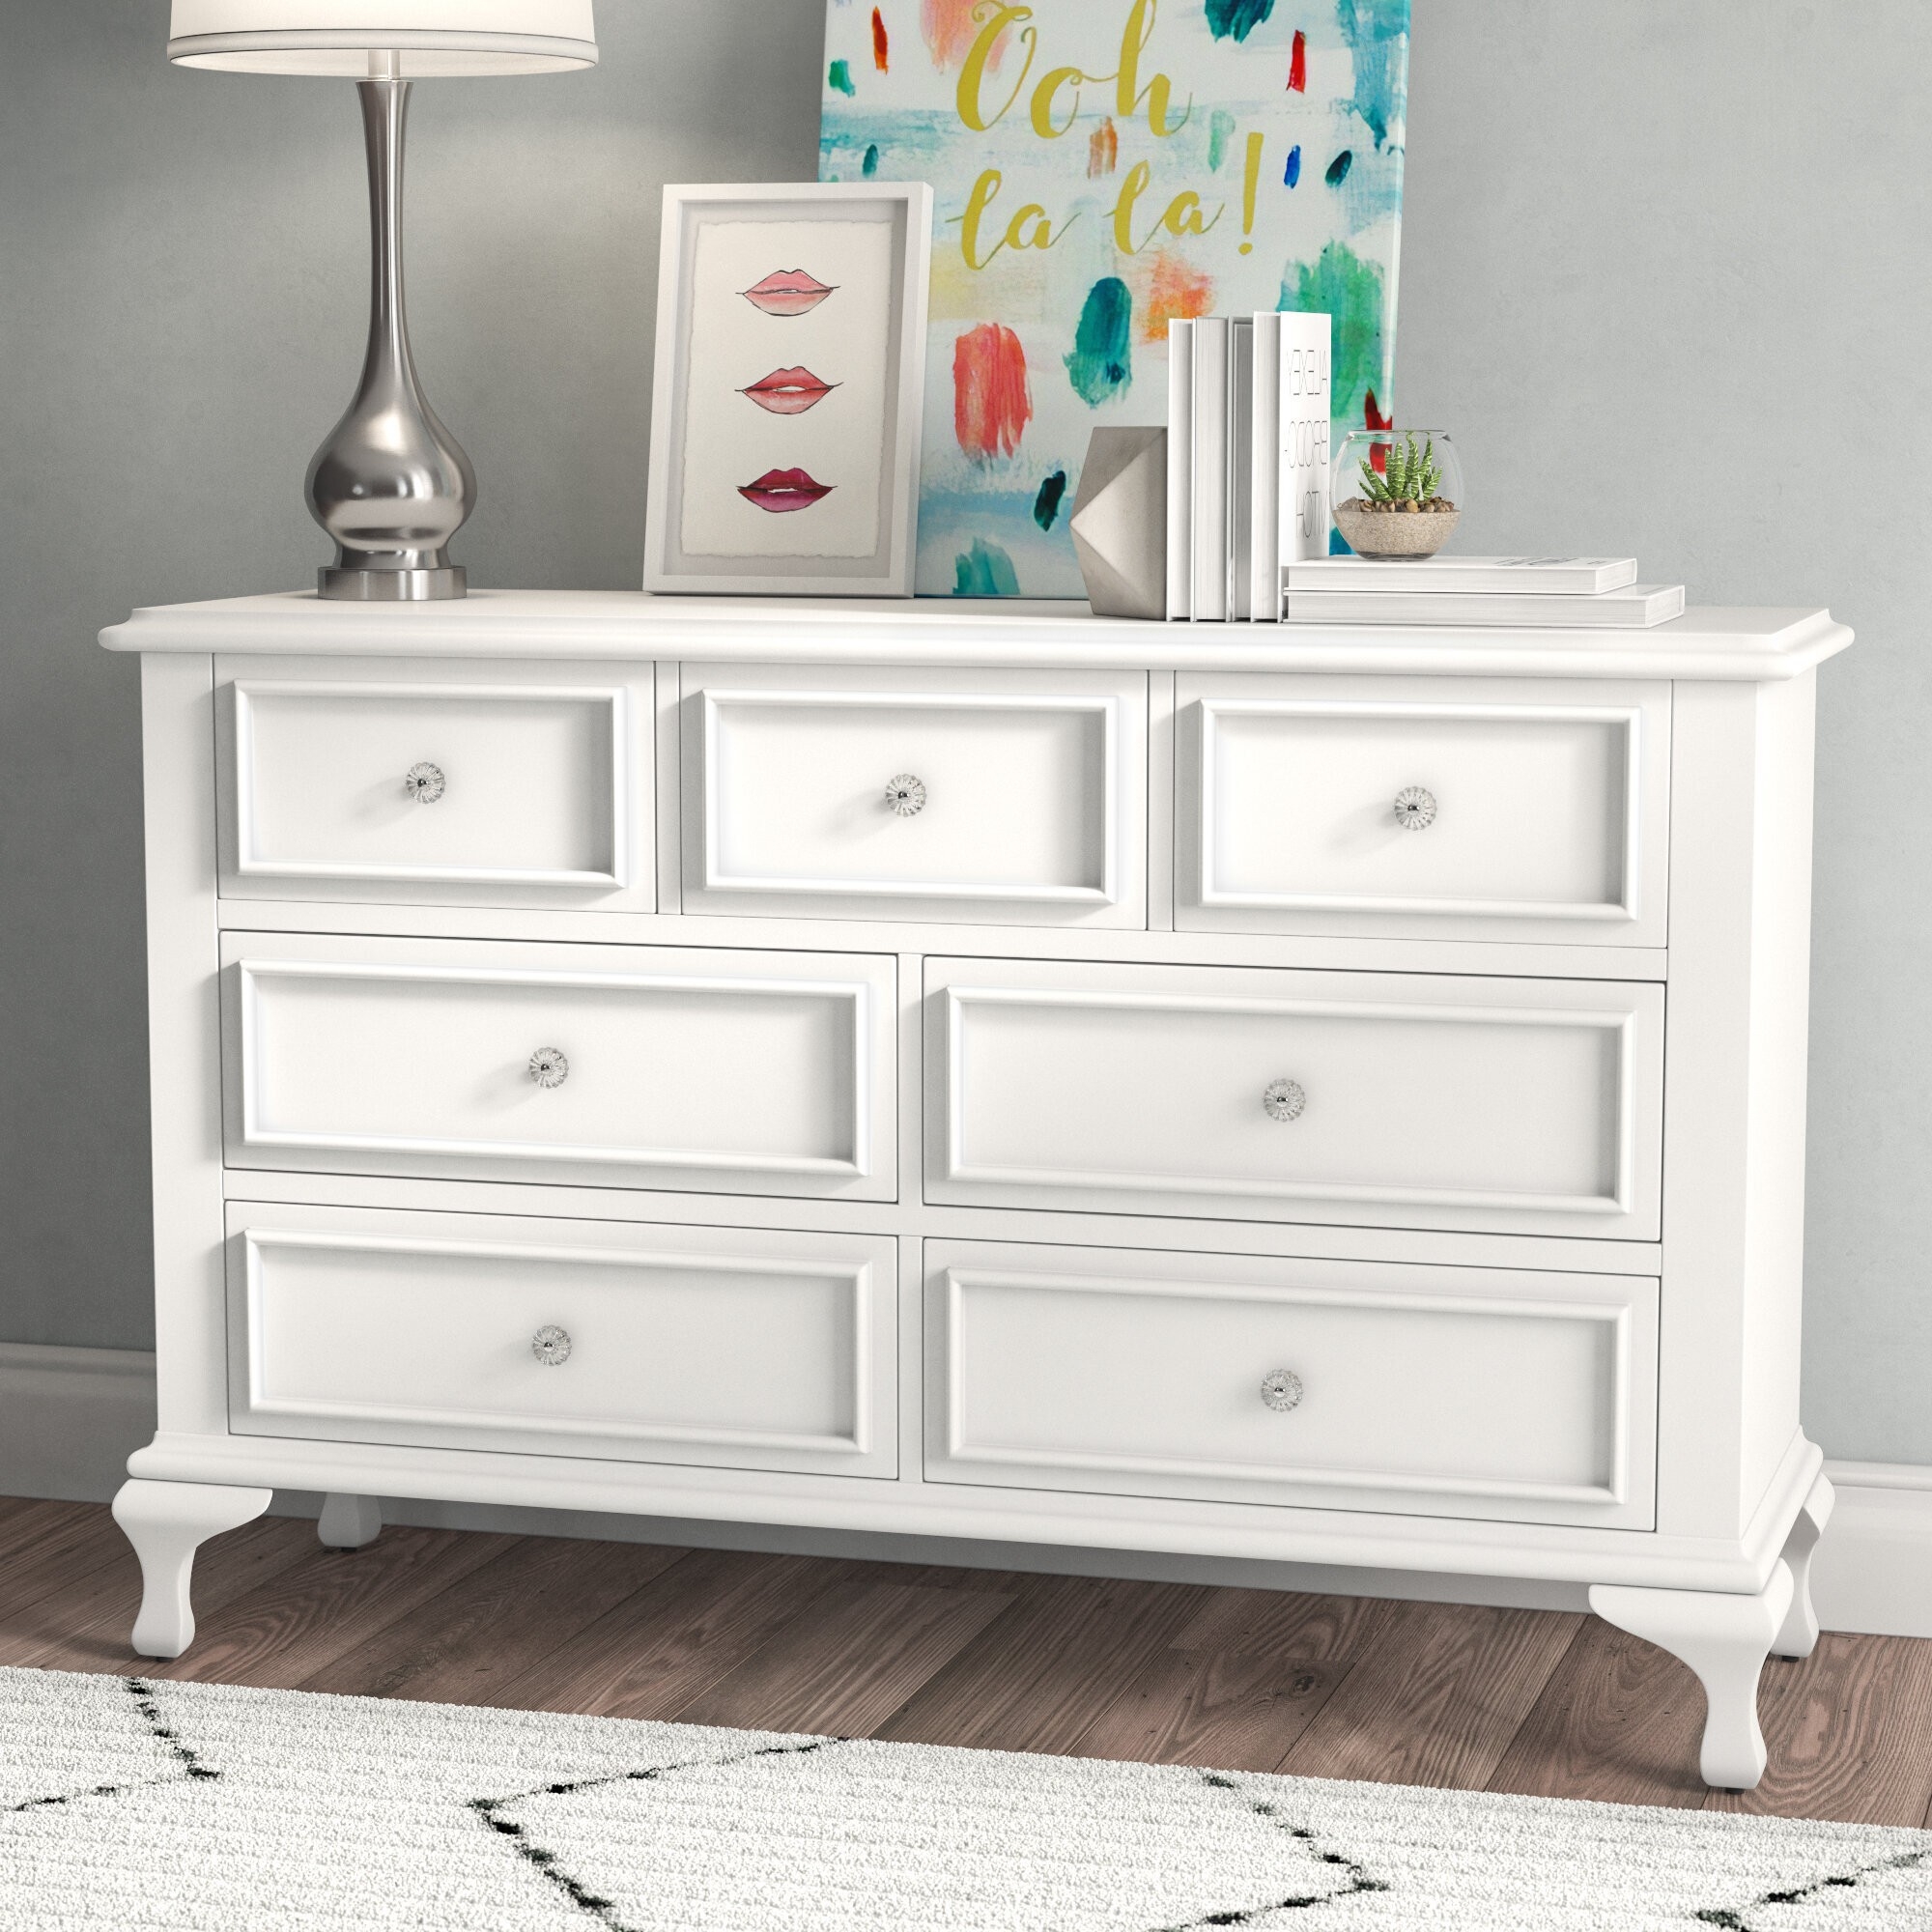 How to Choose Baby & Kids Dressers - Foter